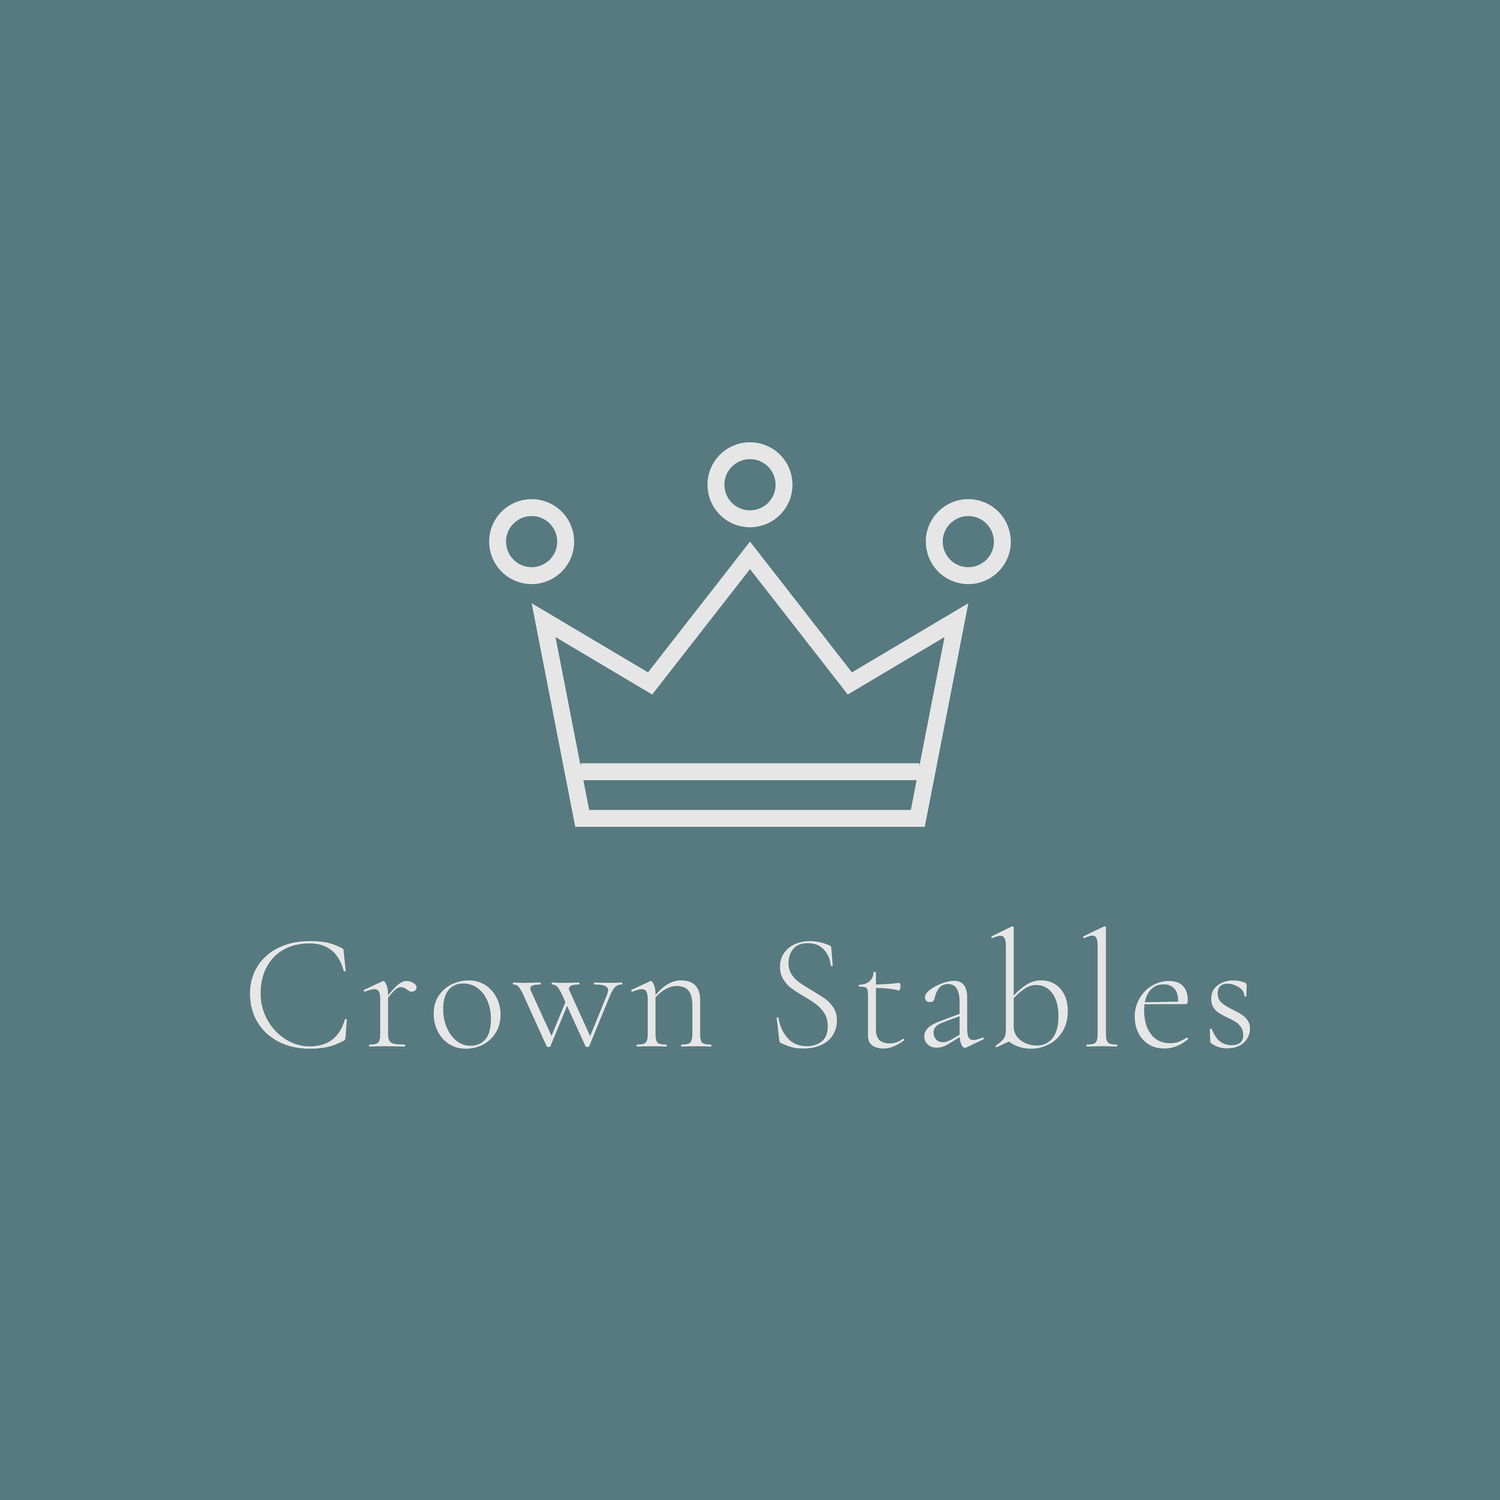 Crown Stables